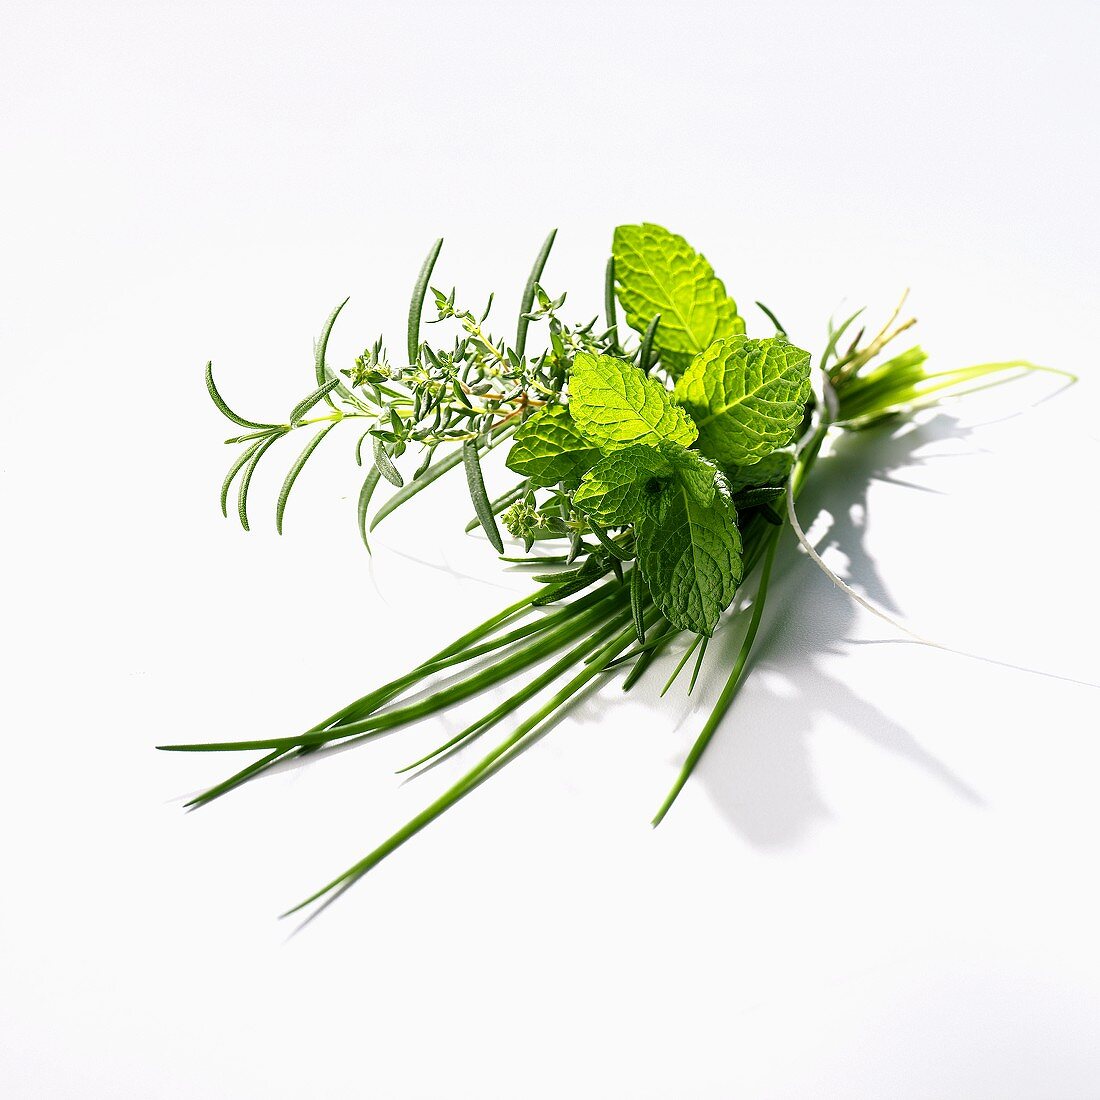 Bunch of herbs on white background